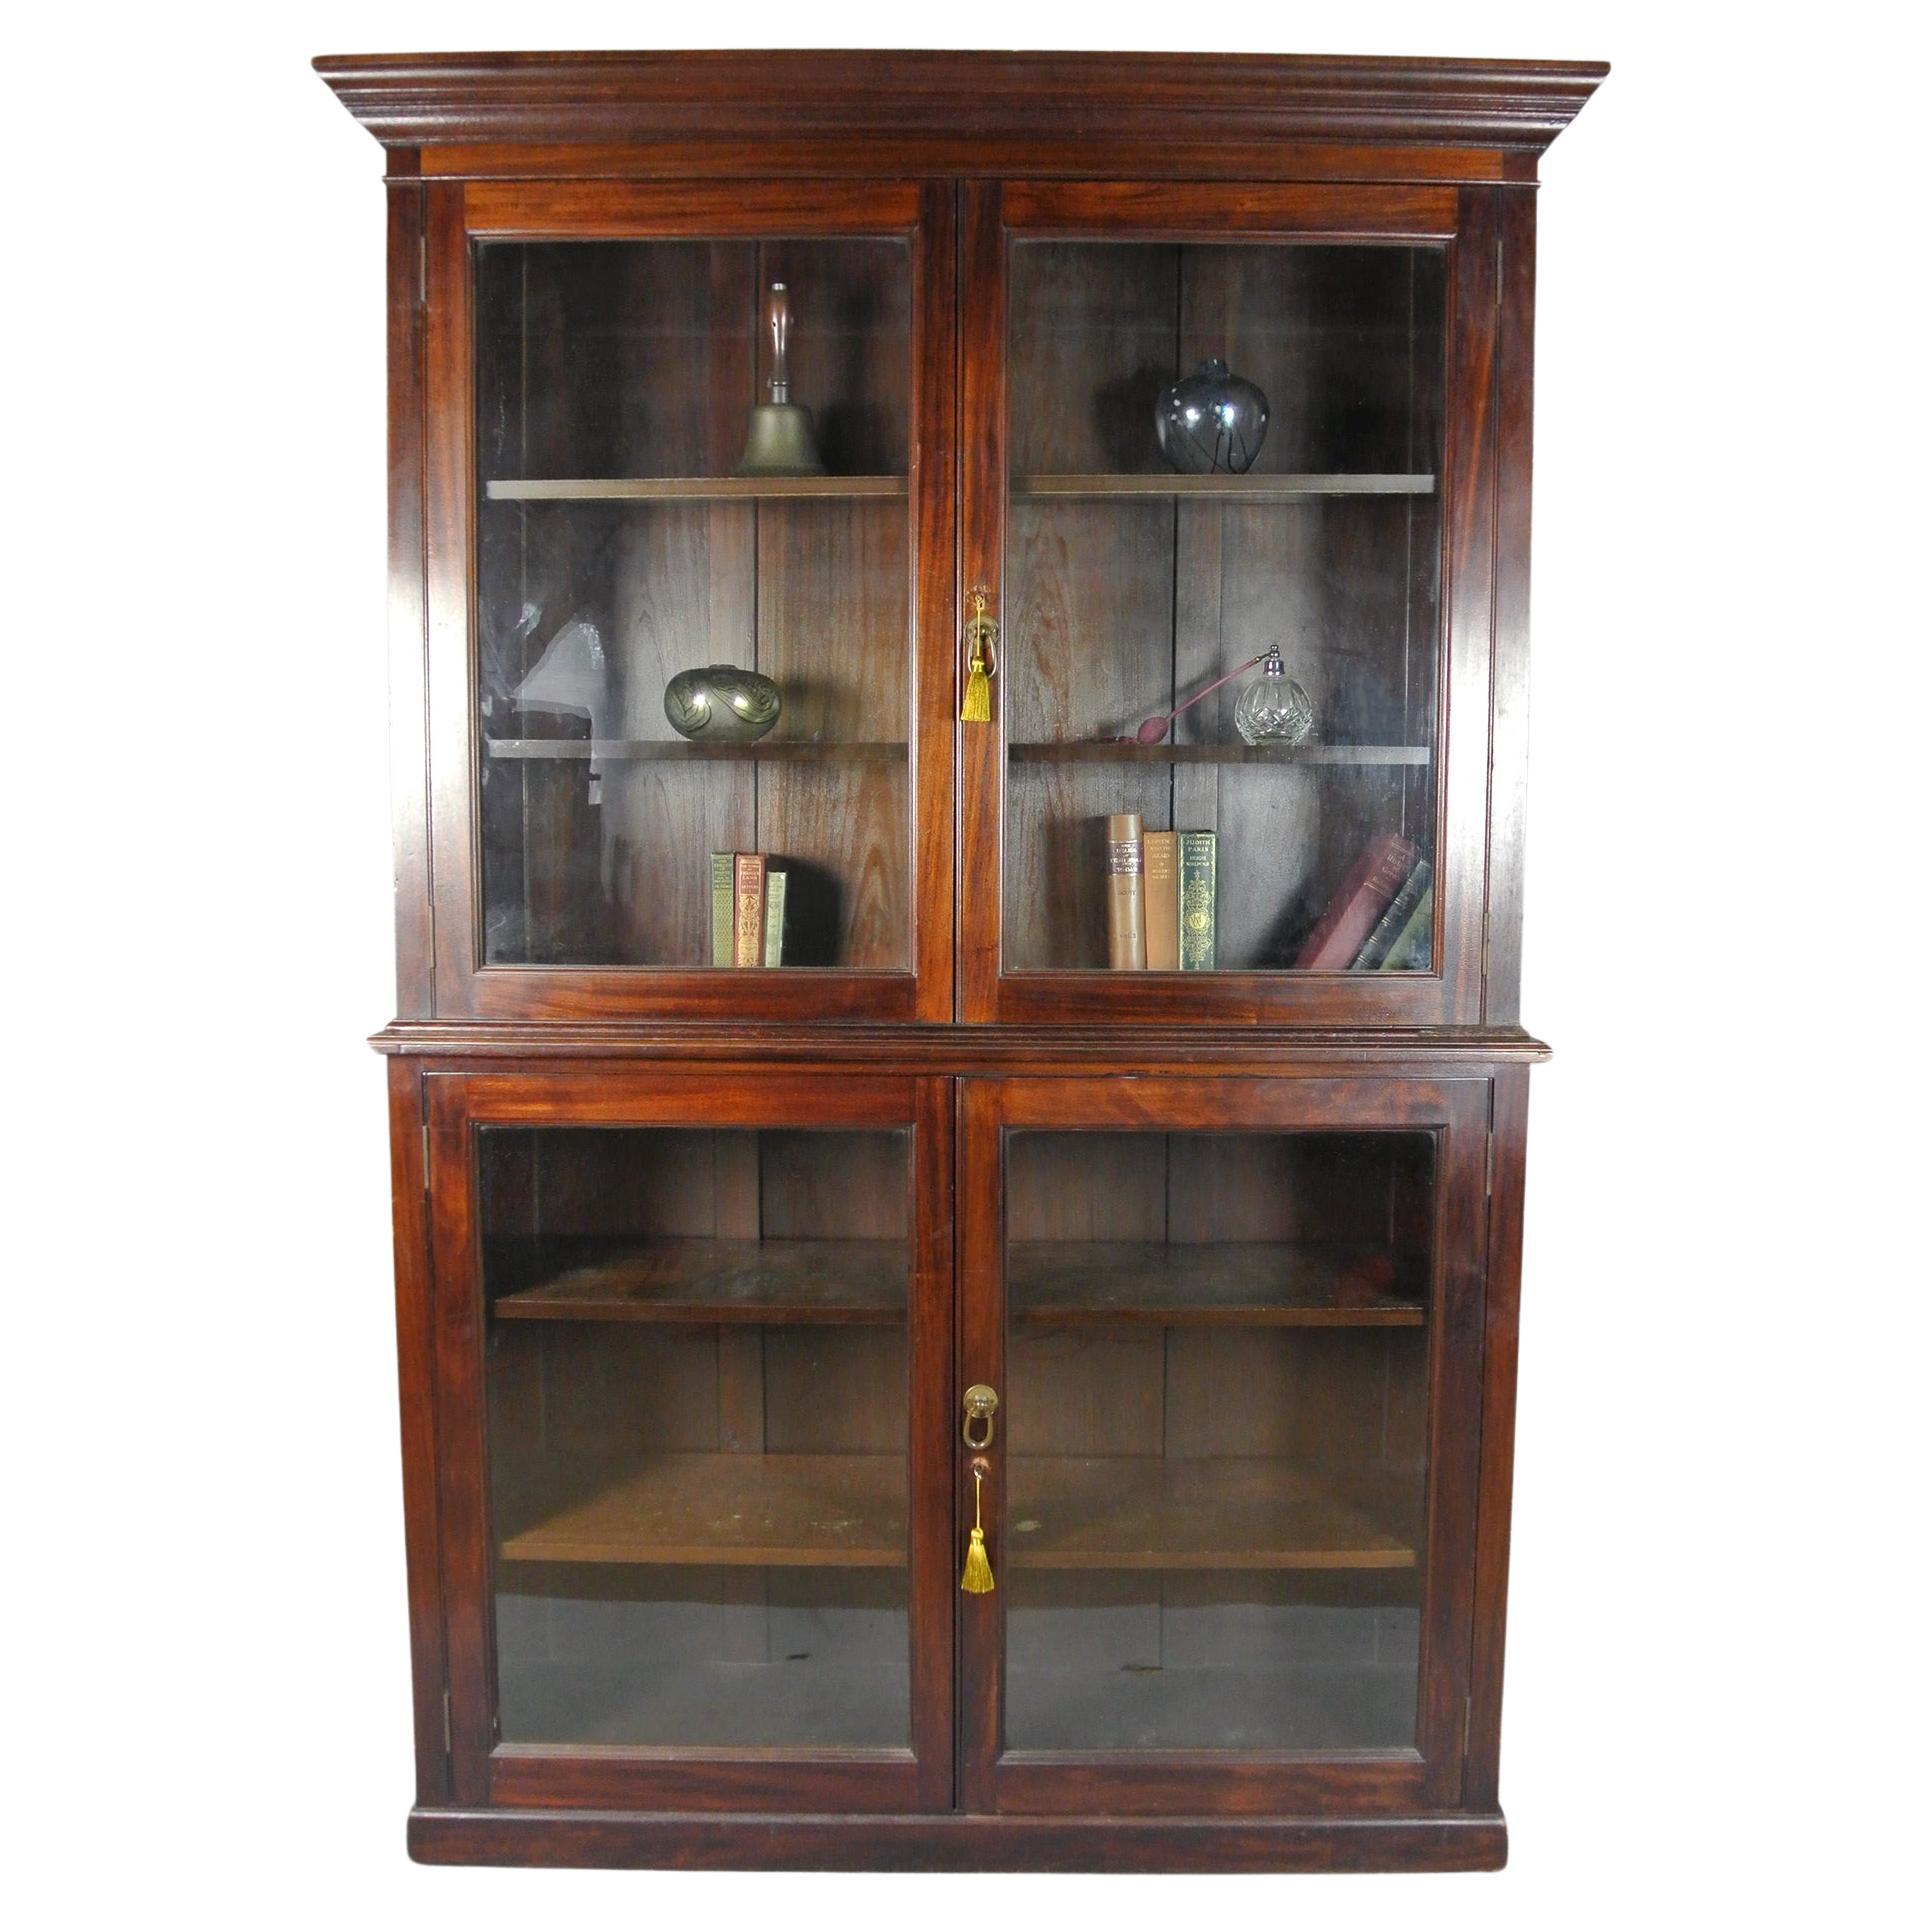 Late Victorian Mahogany Display Case and Bookcase c. 1900